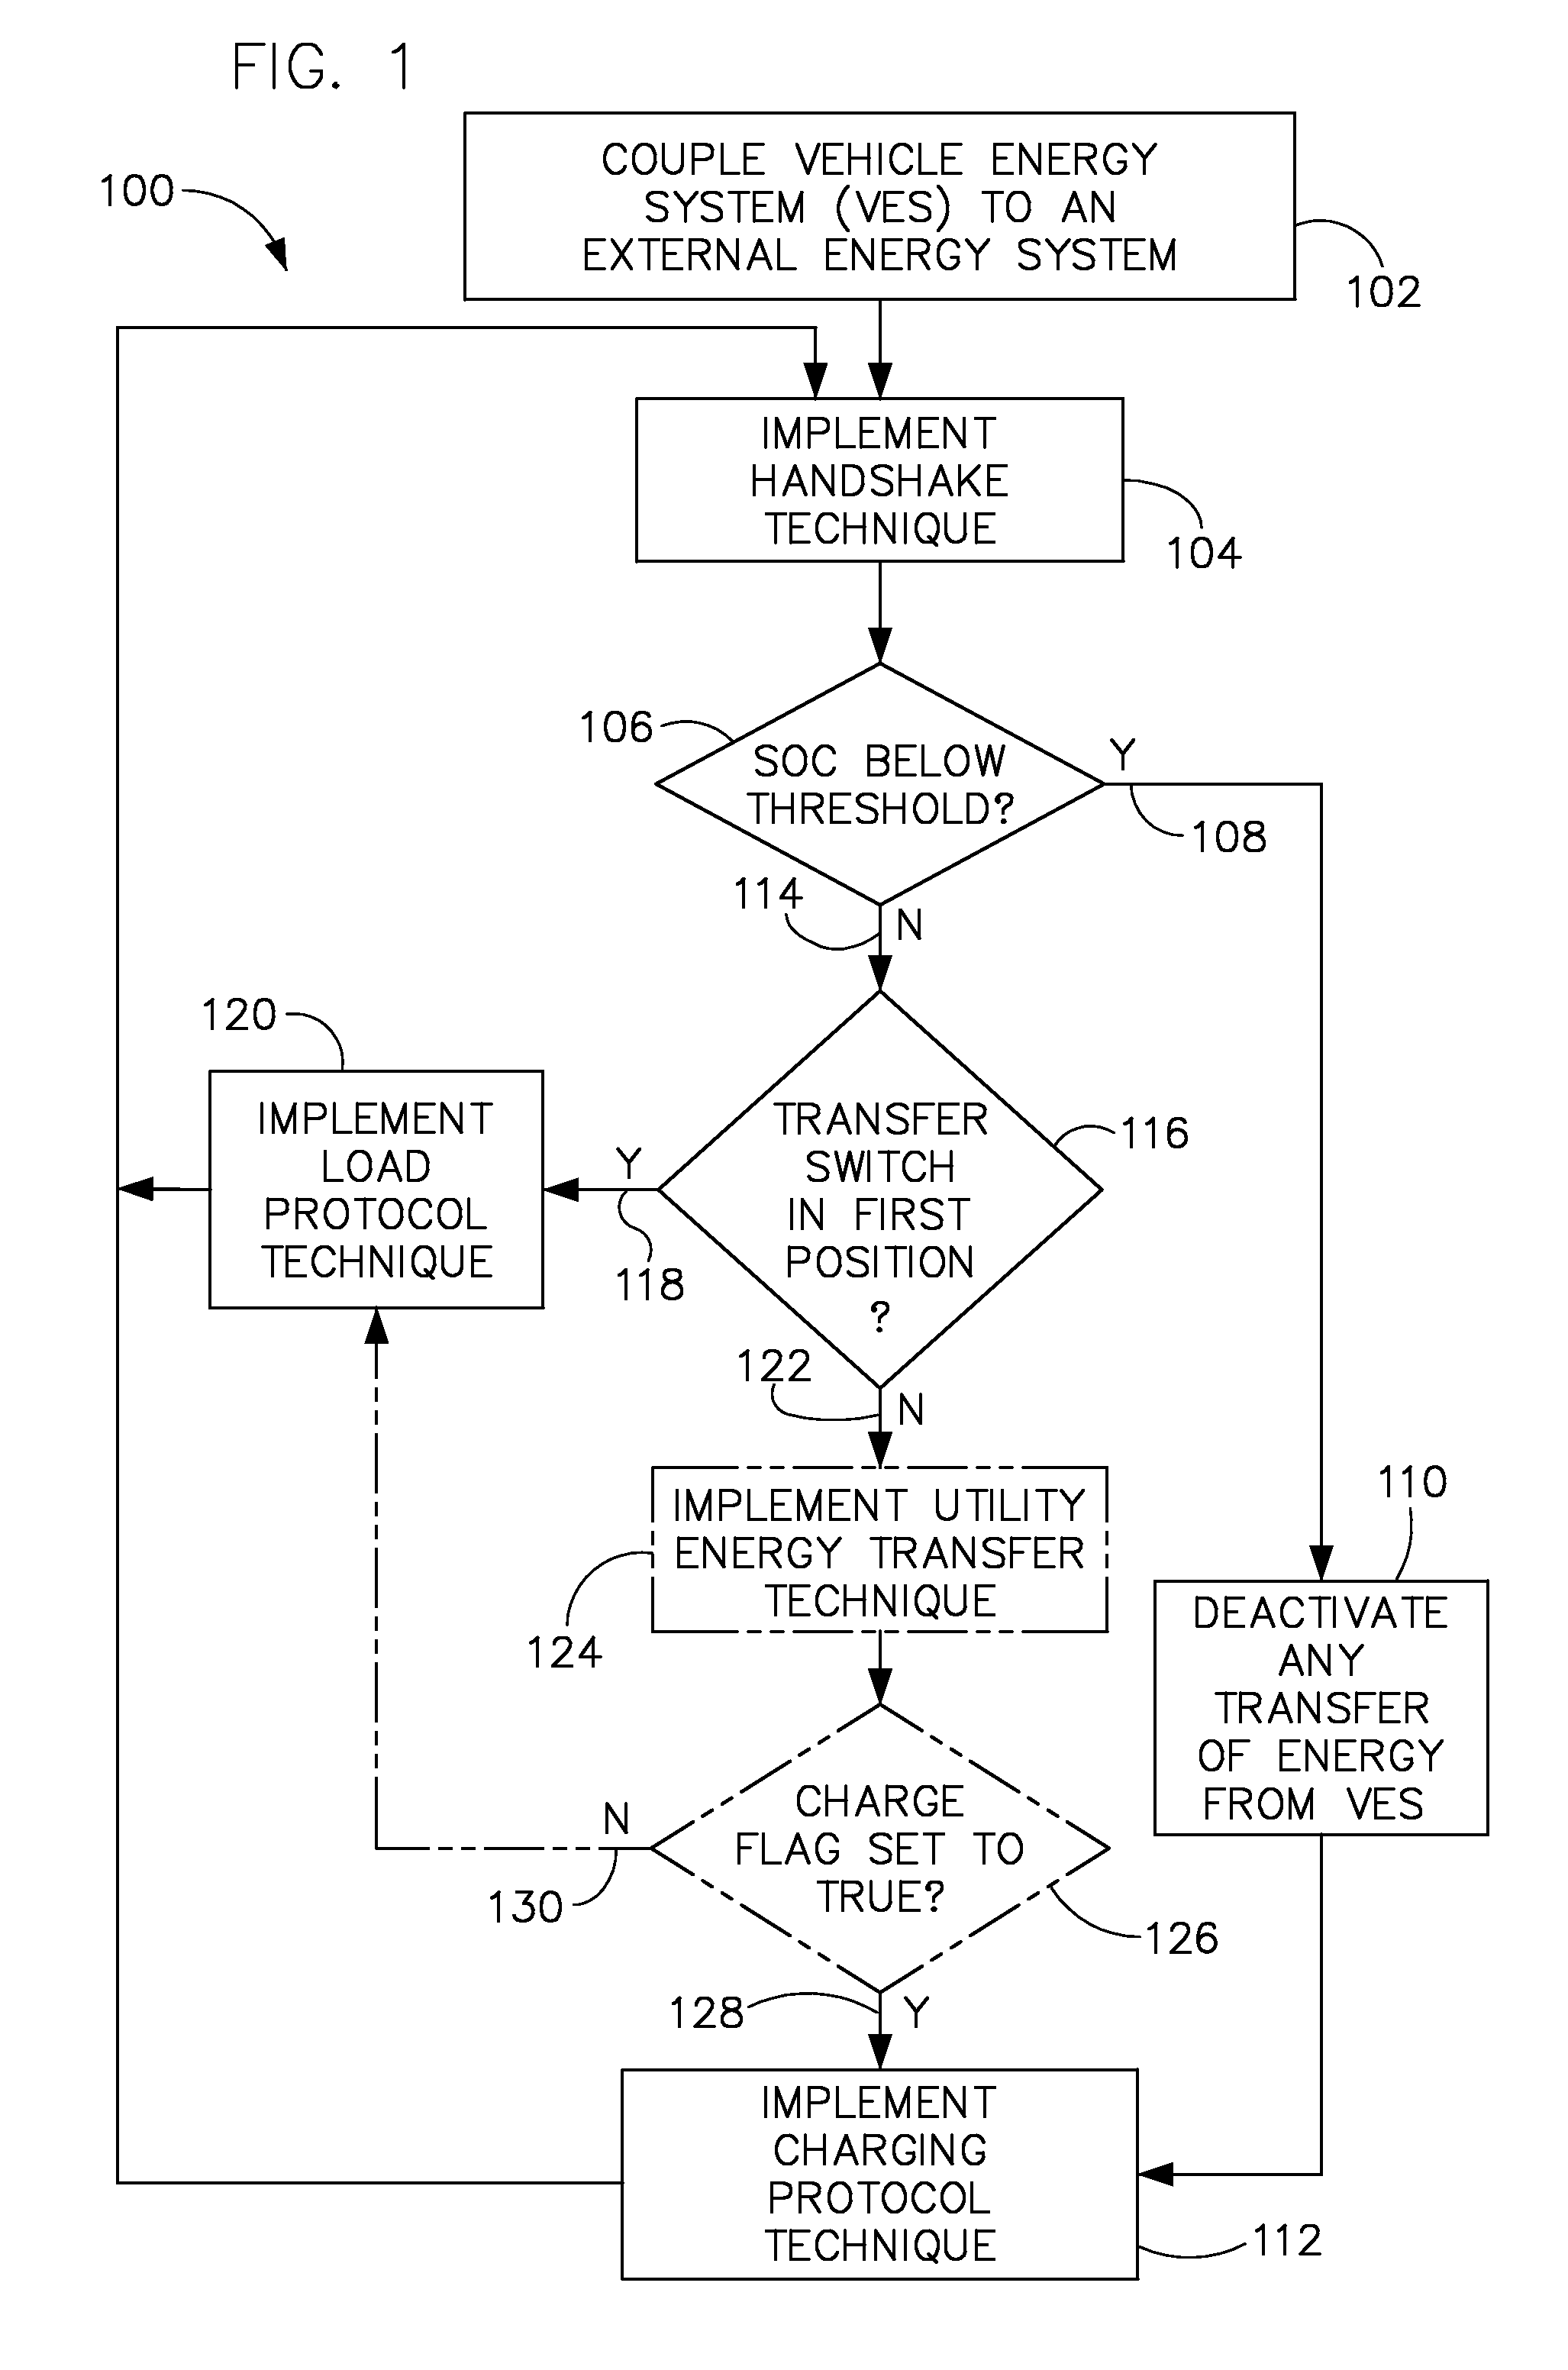 Apparatus, method, and system for conveying electrical energy